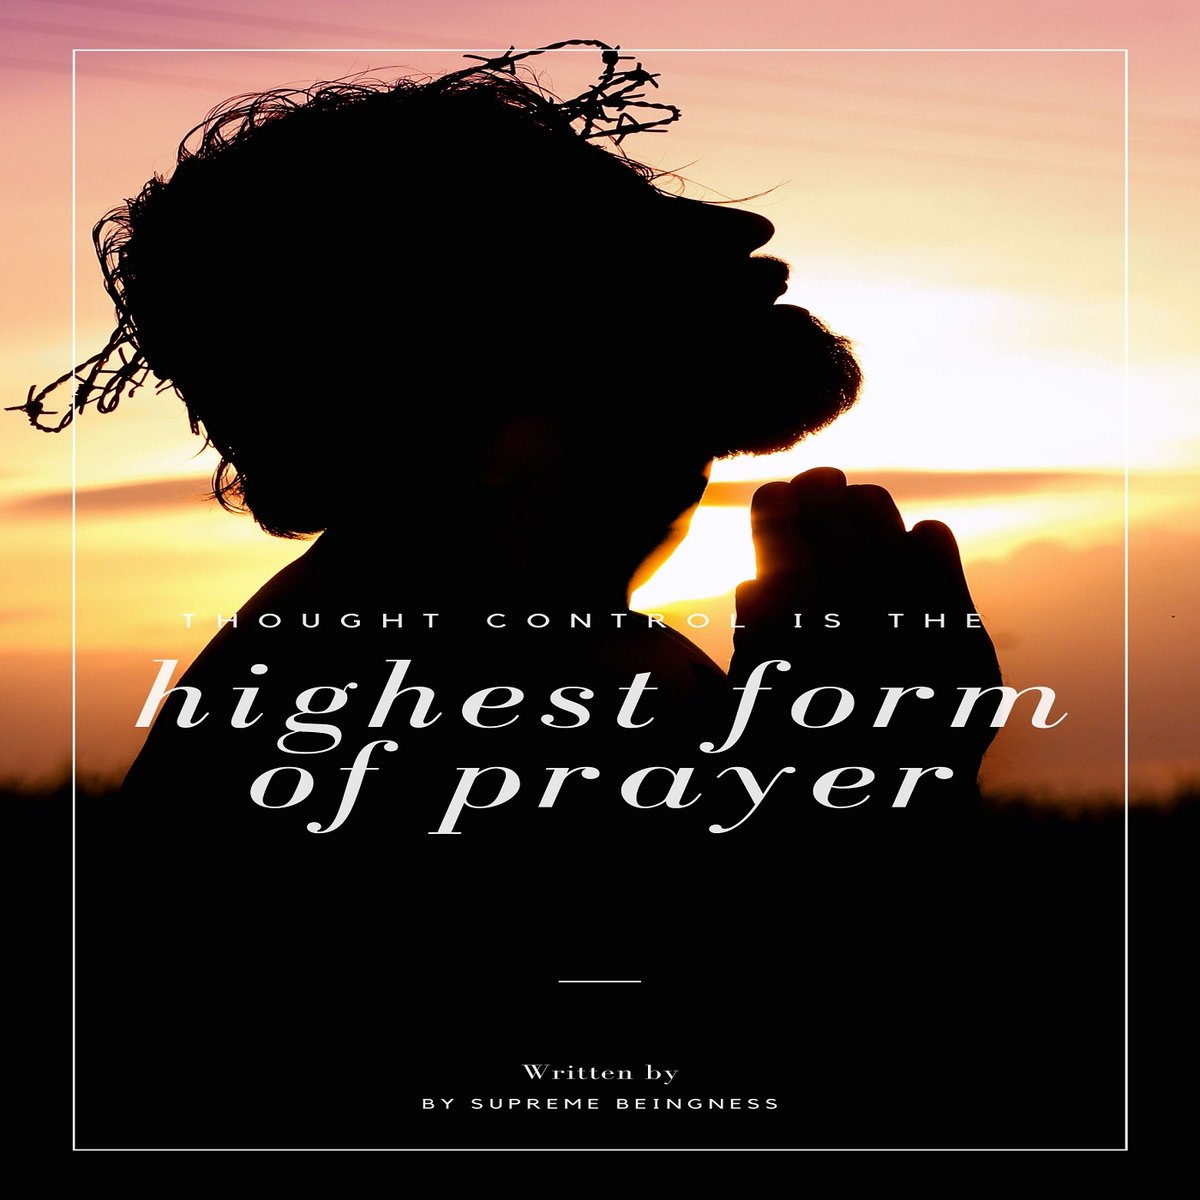 Thought control is the highest form of prayer seekershaven.club/downloads.php

..
*******

P.S. For Every Member You sign up and Upgrades, we will send you $5.6!

seekershaven.club/?ref=user001
#SpiritualJourney